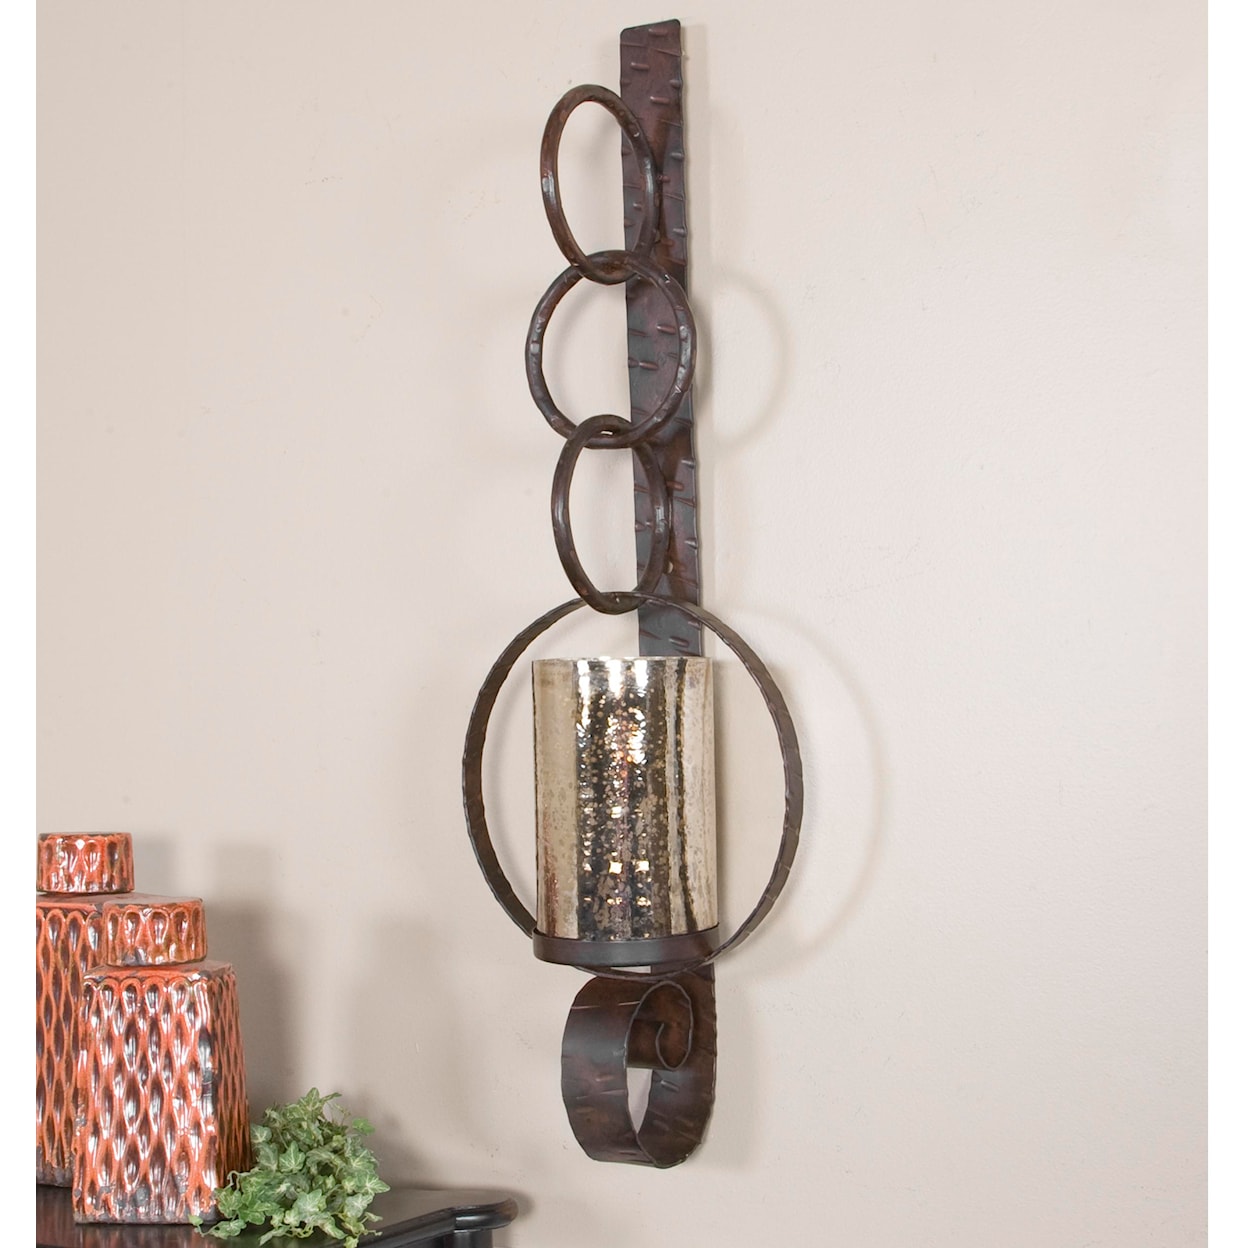 Uttermost Accessories - Candle Holders Falconara Metal Wall Sconce